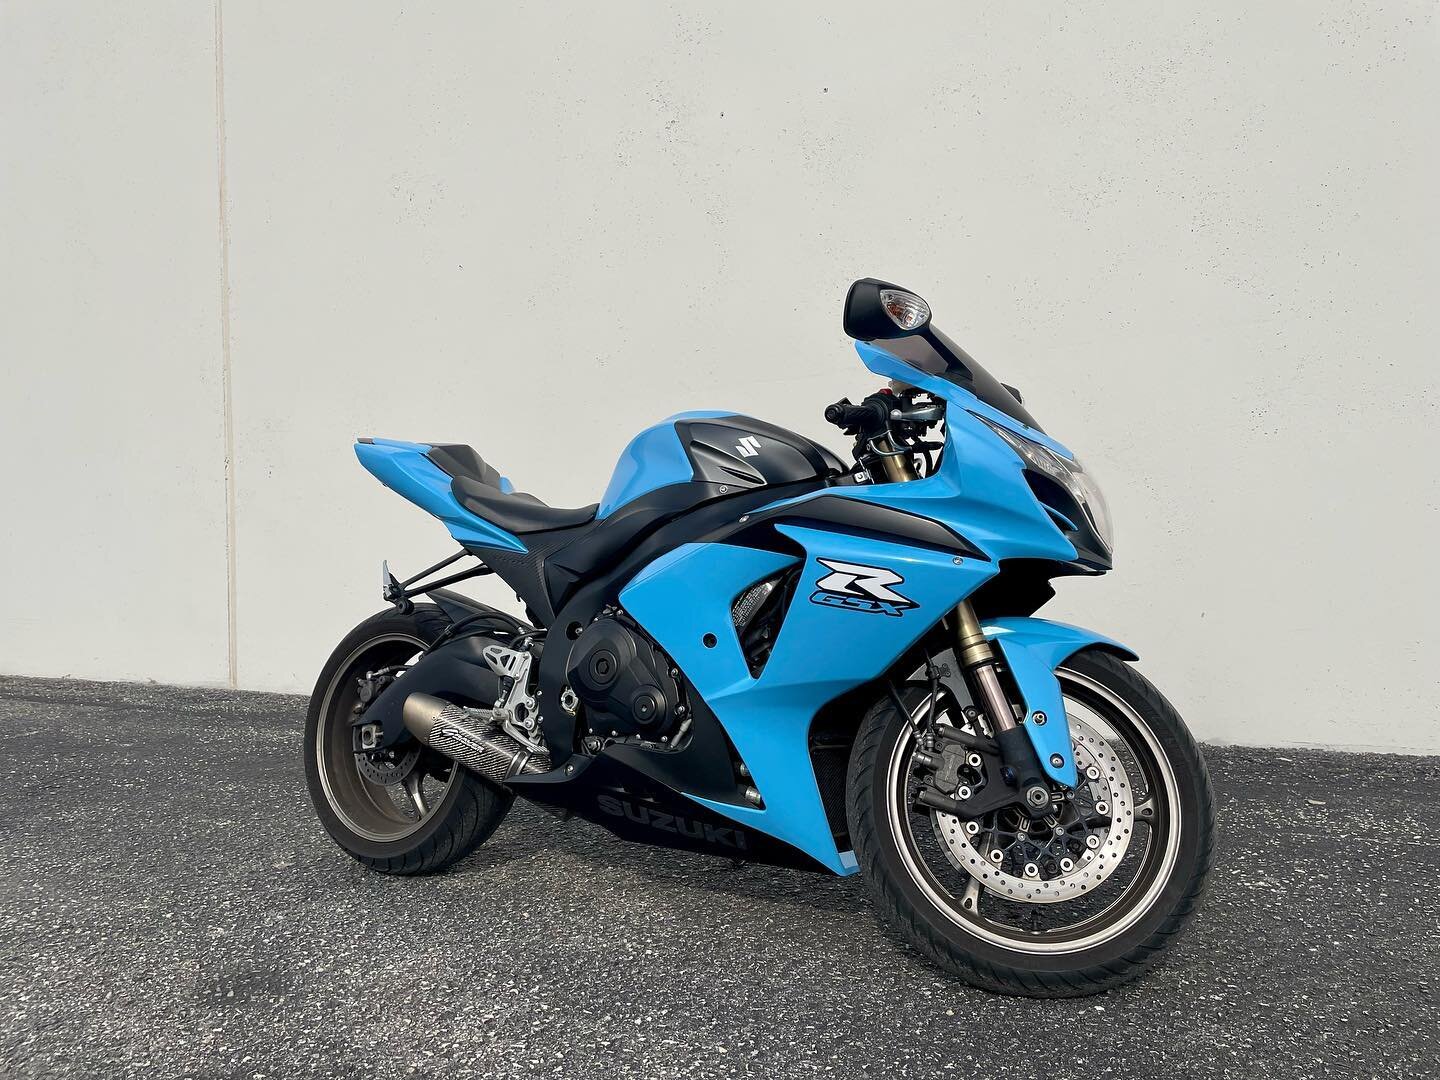 We typically don&rsquo;t wrap bikes&hellip; but when @whosethis410 wanted @inozetek Kato&rsquo;s Kenmerry Blue on his GSXR 1000, we signed up for the challenge! And it indeed was a challenge, but we&rsquo;ll let the results speak for themselves #radw